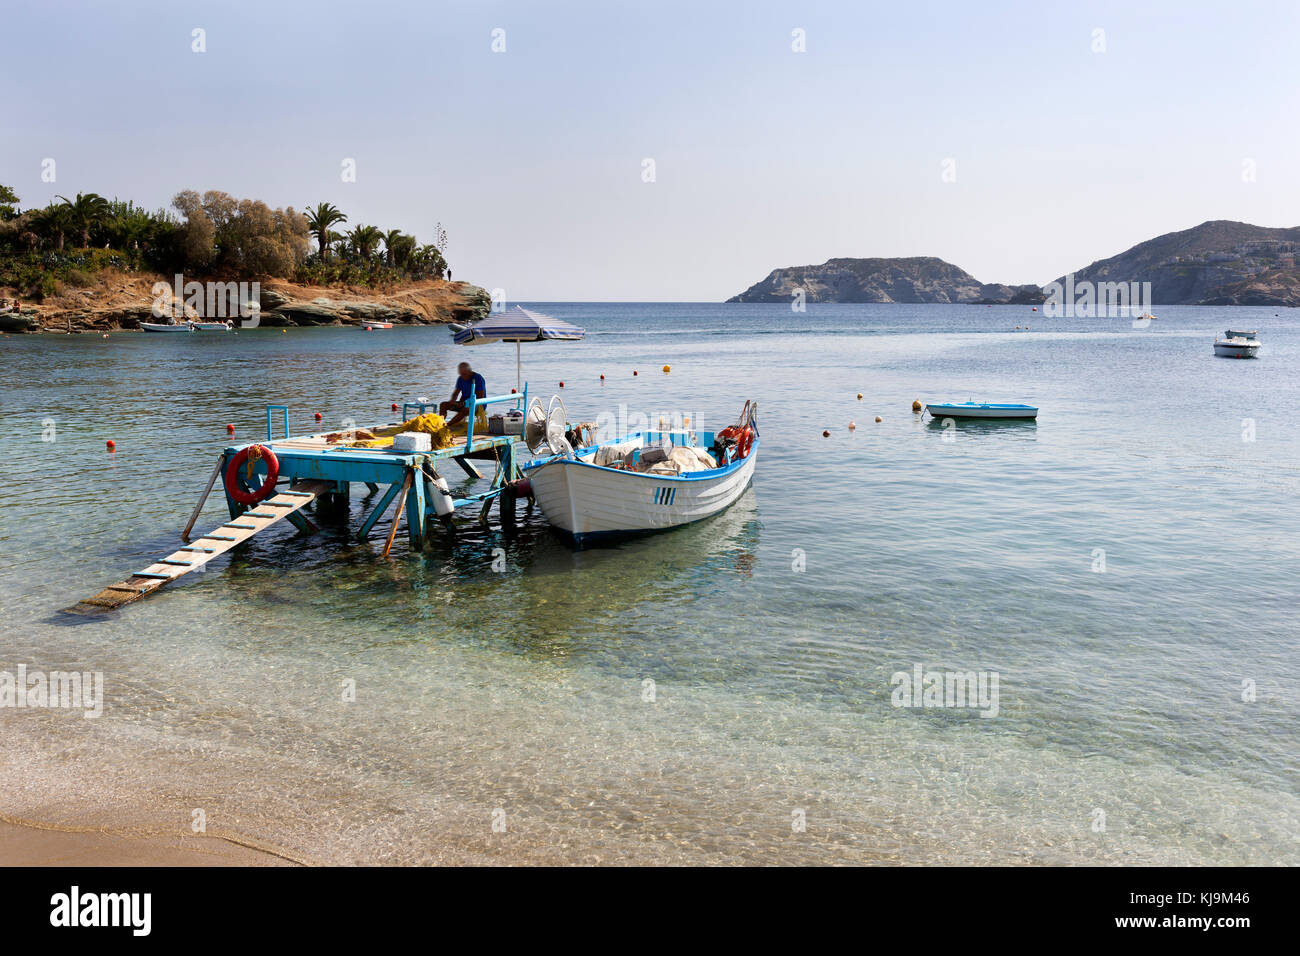 Bay of Agia Pelagia where a fisherman is repairing his nets near the beach on the island  Crete in Greece Stock Photo